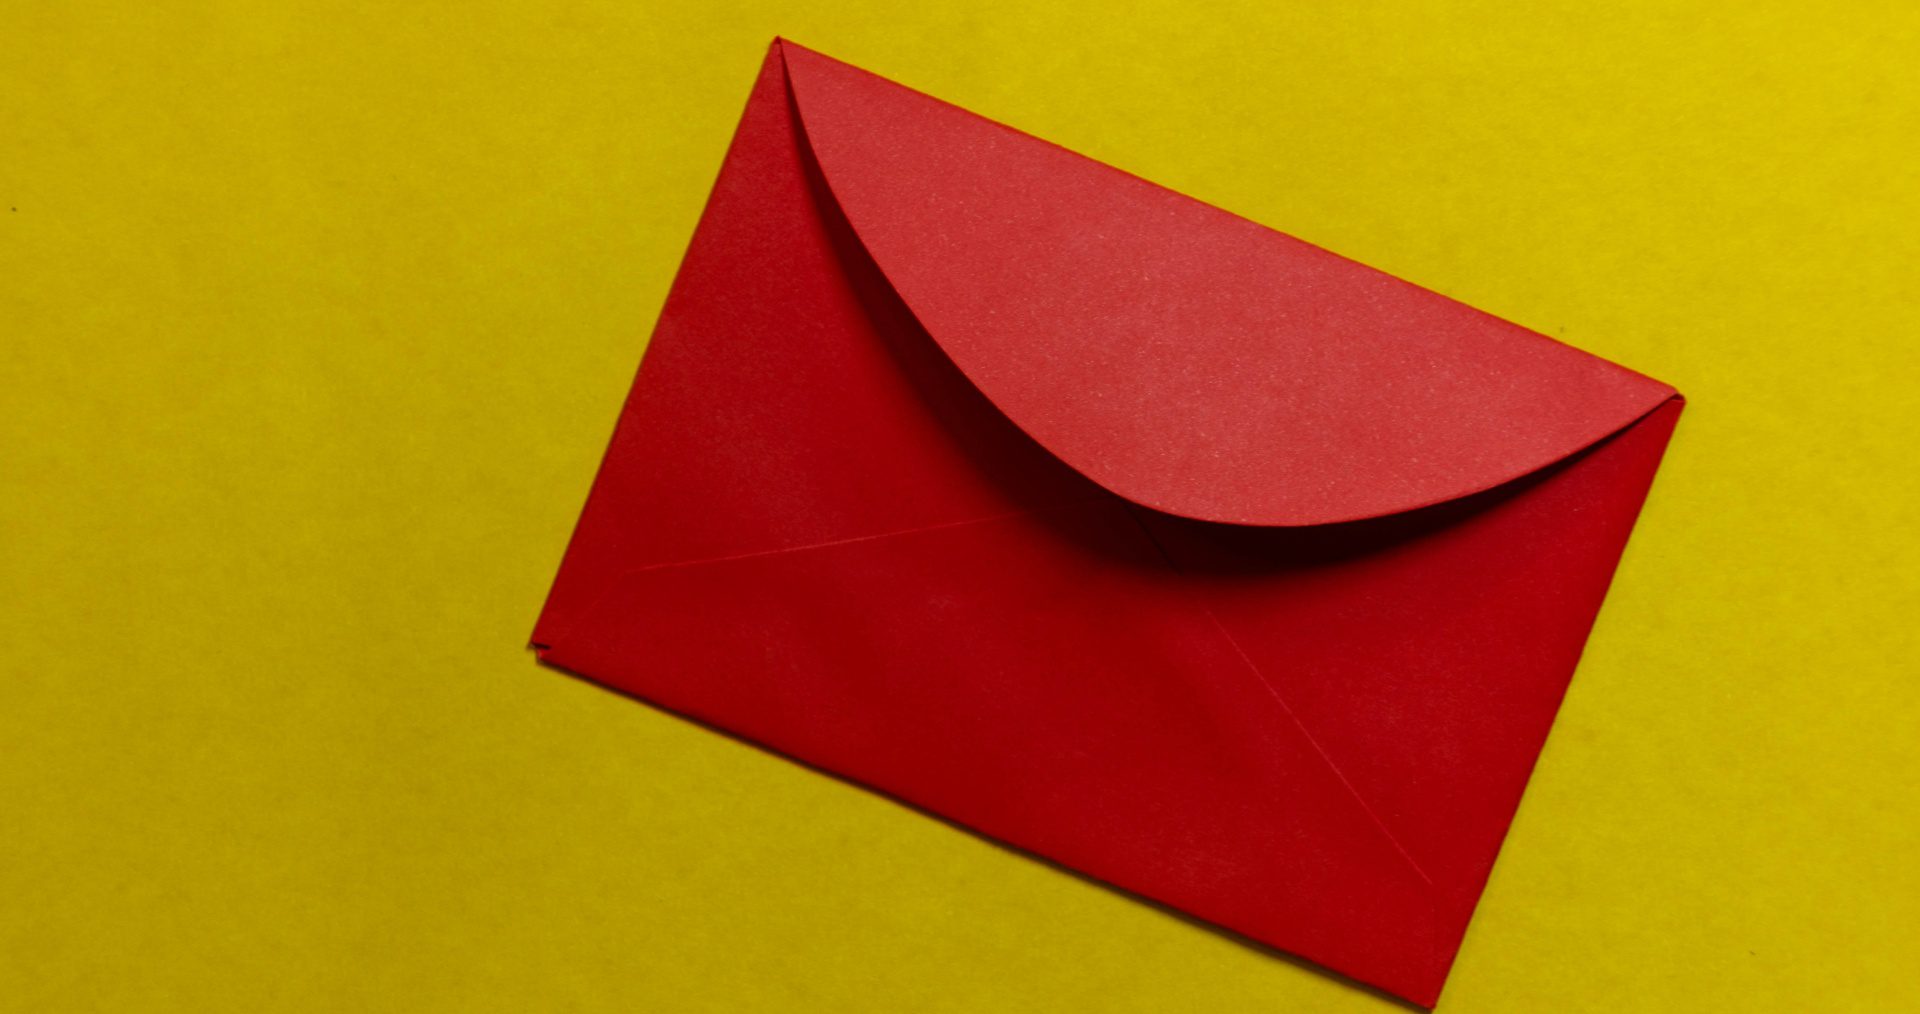 A red envelope on a yellow background